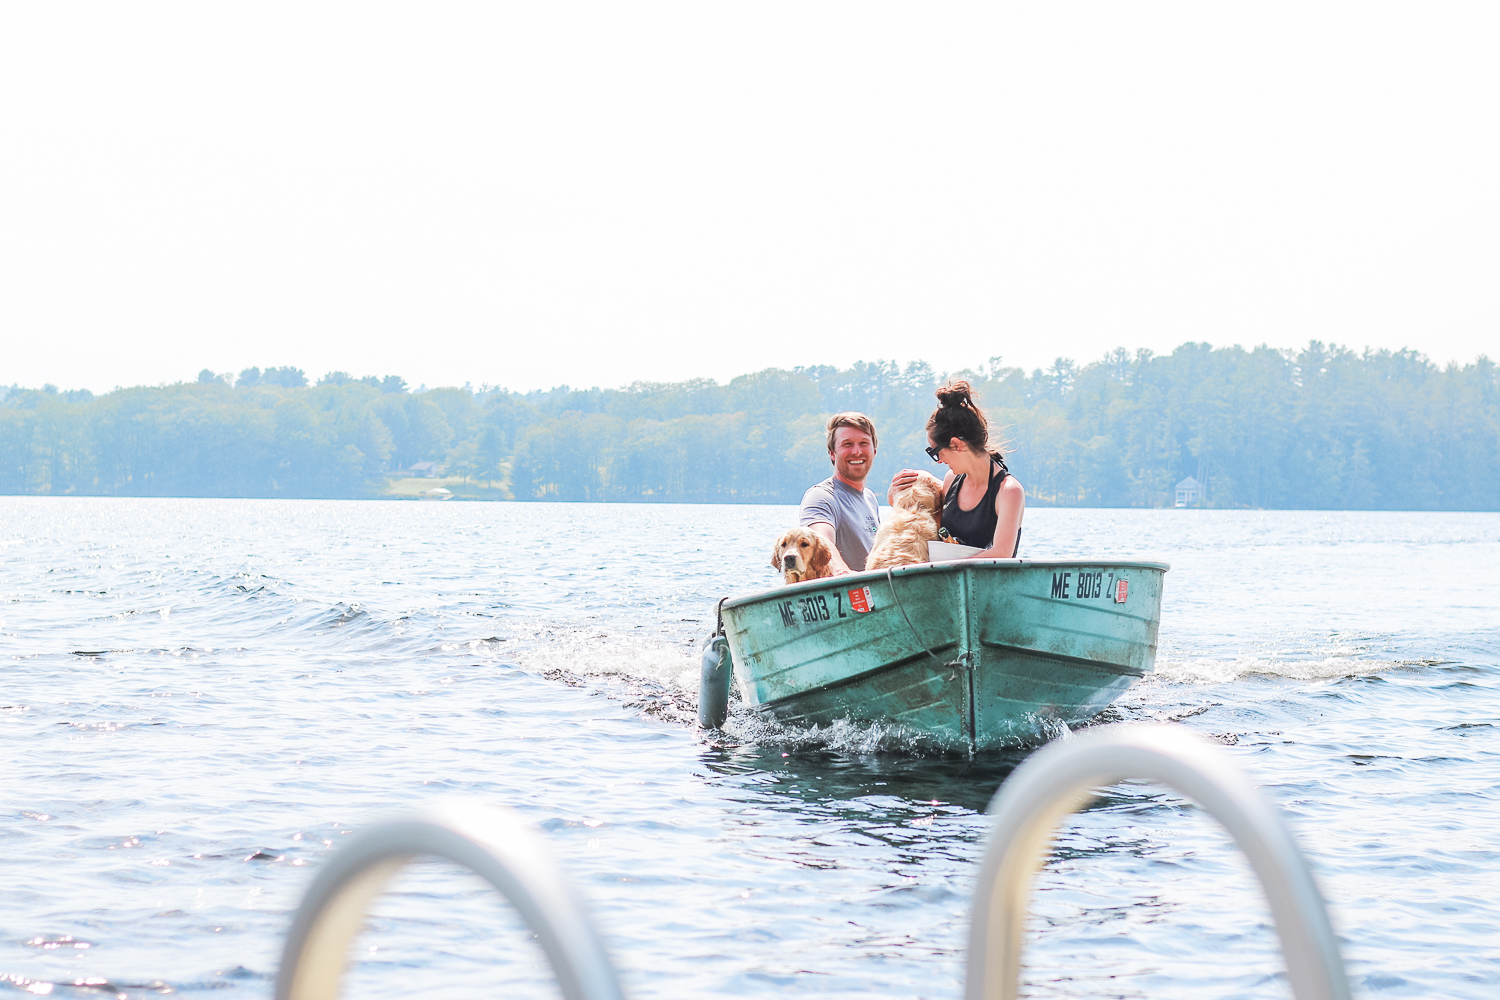 Our Maine Proposal Story by popular midwest lifestyle blogger Stephanie Ziajka from Diary of a Debutante, Damariscotta Lake proposal photos, Maine engagement photos